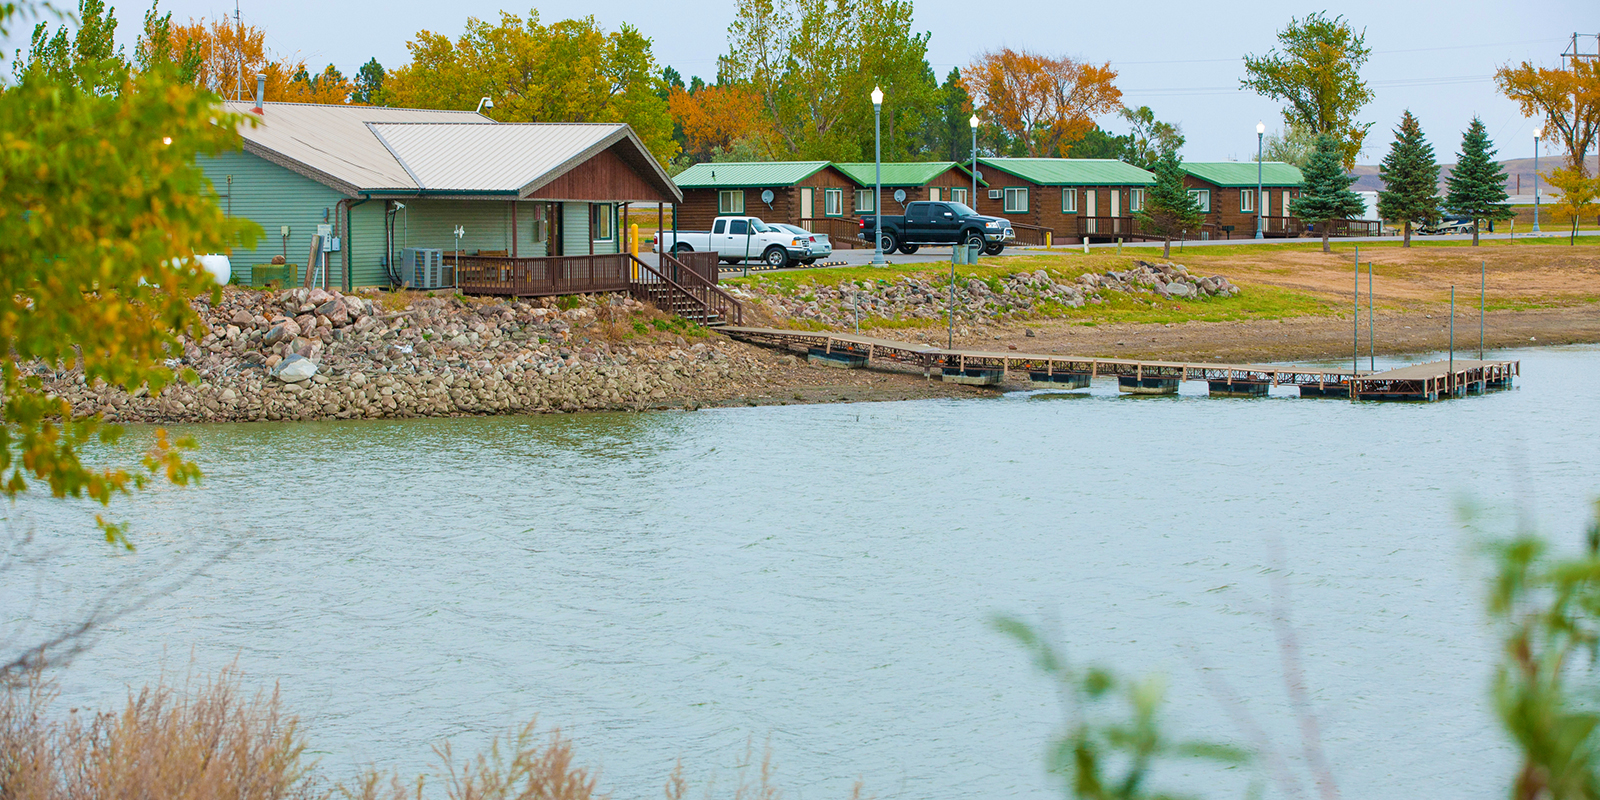 Dock at the Bay with cabins in the background